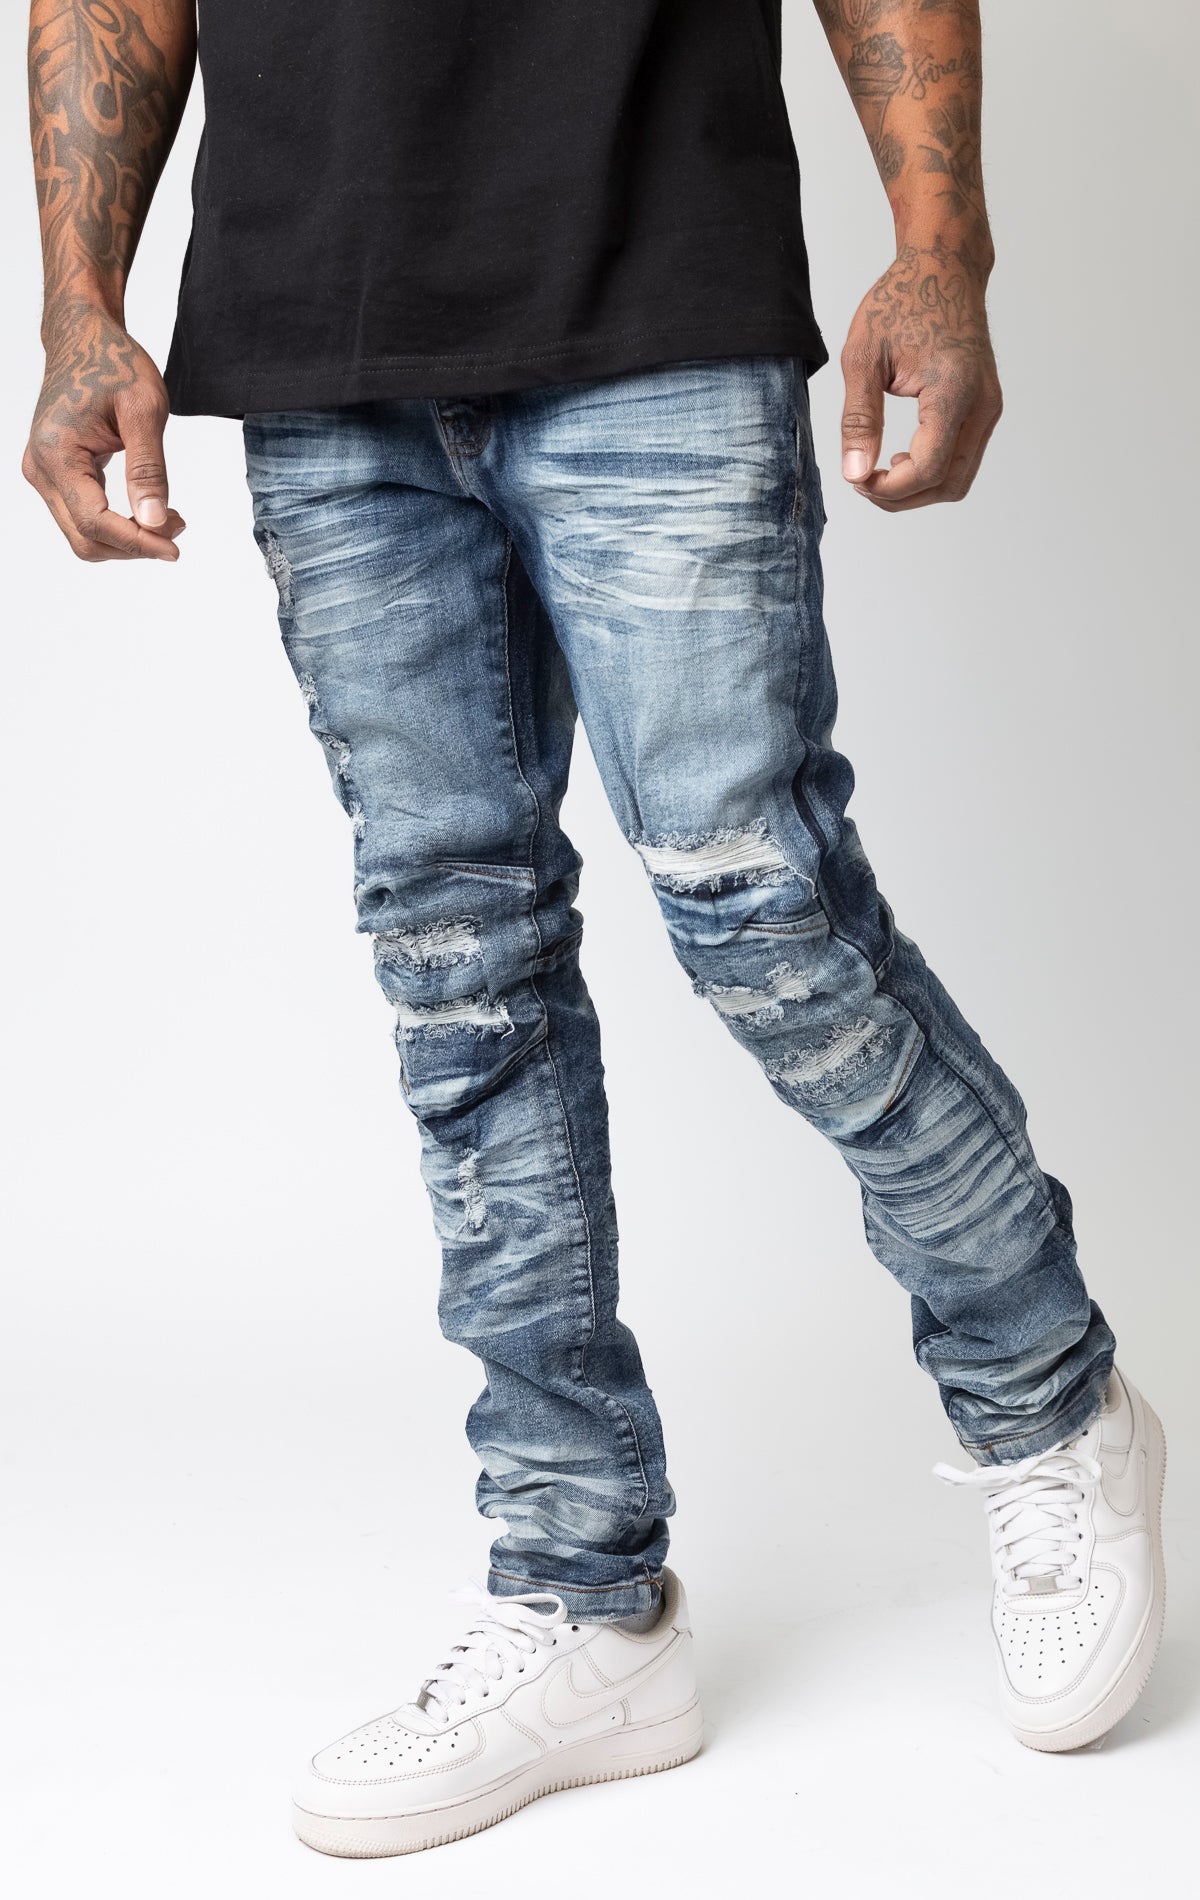 Solid blue Washed up slim fit denim jeans, rip and repair style.